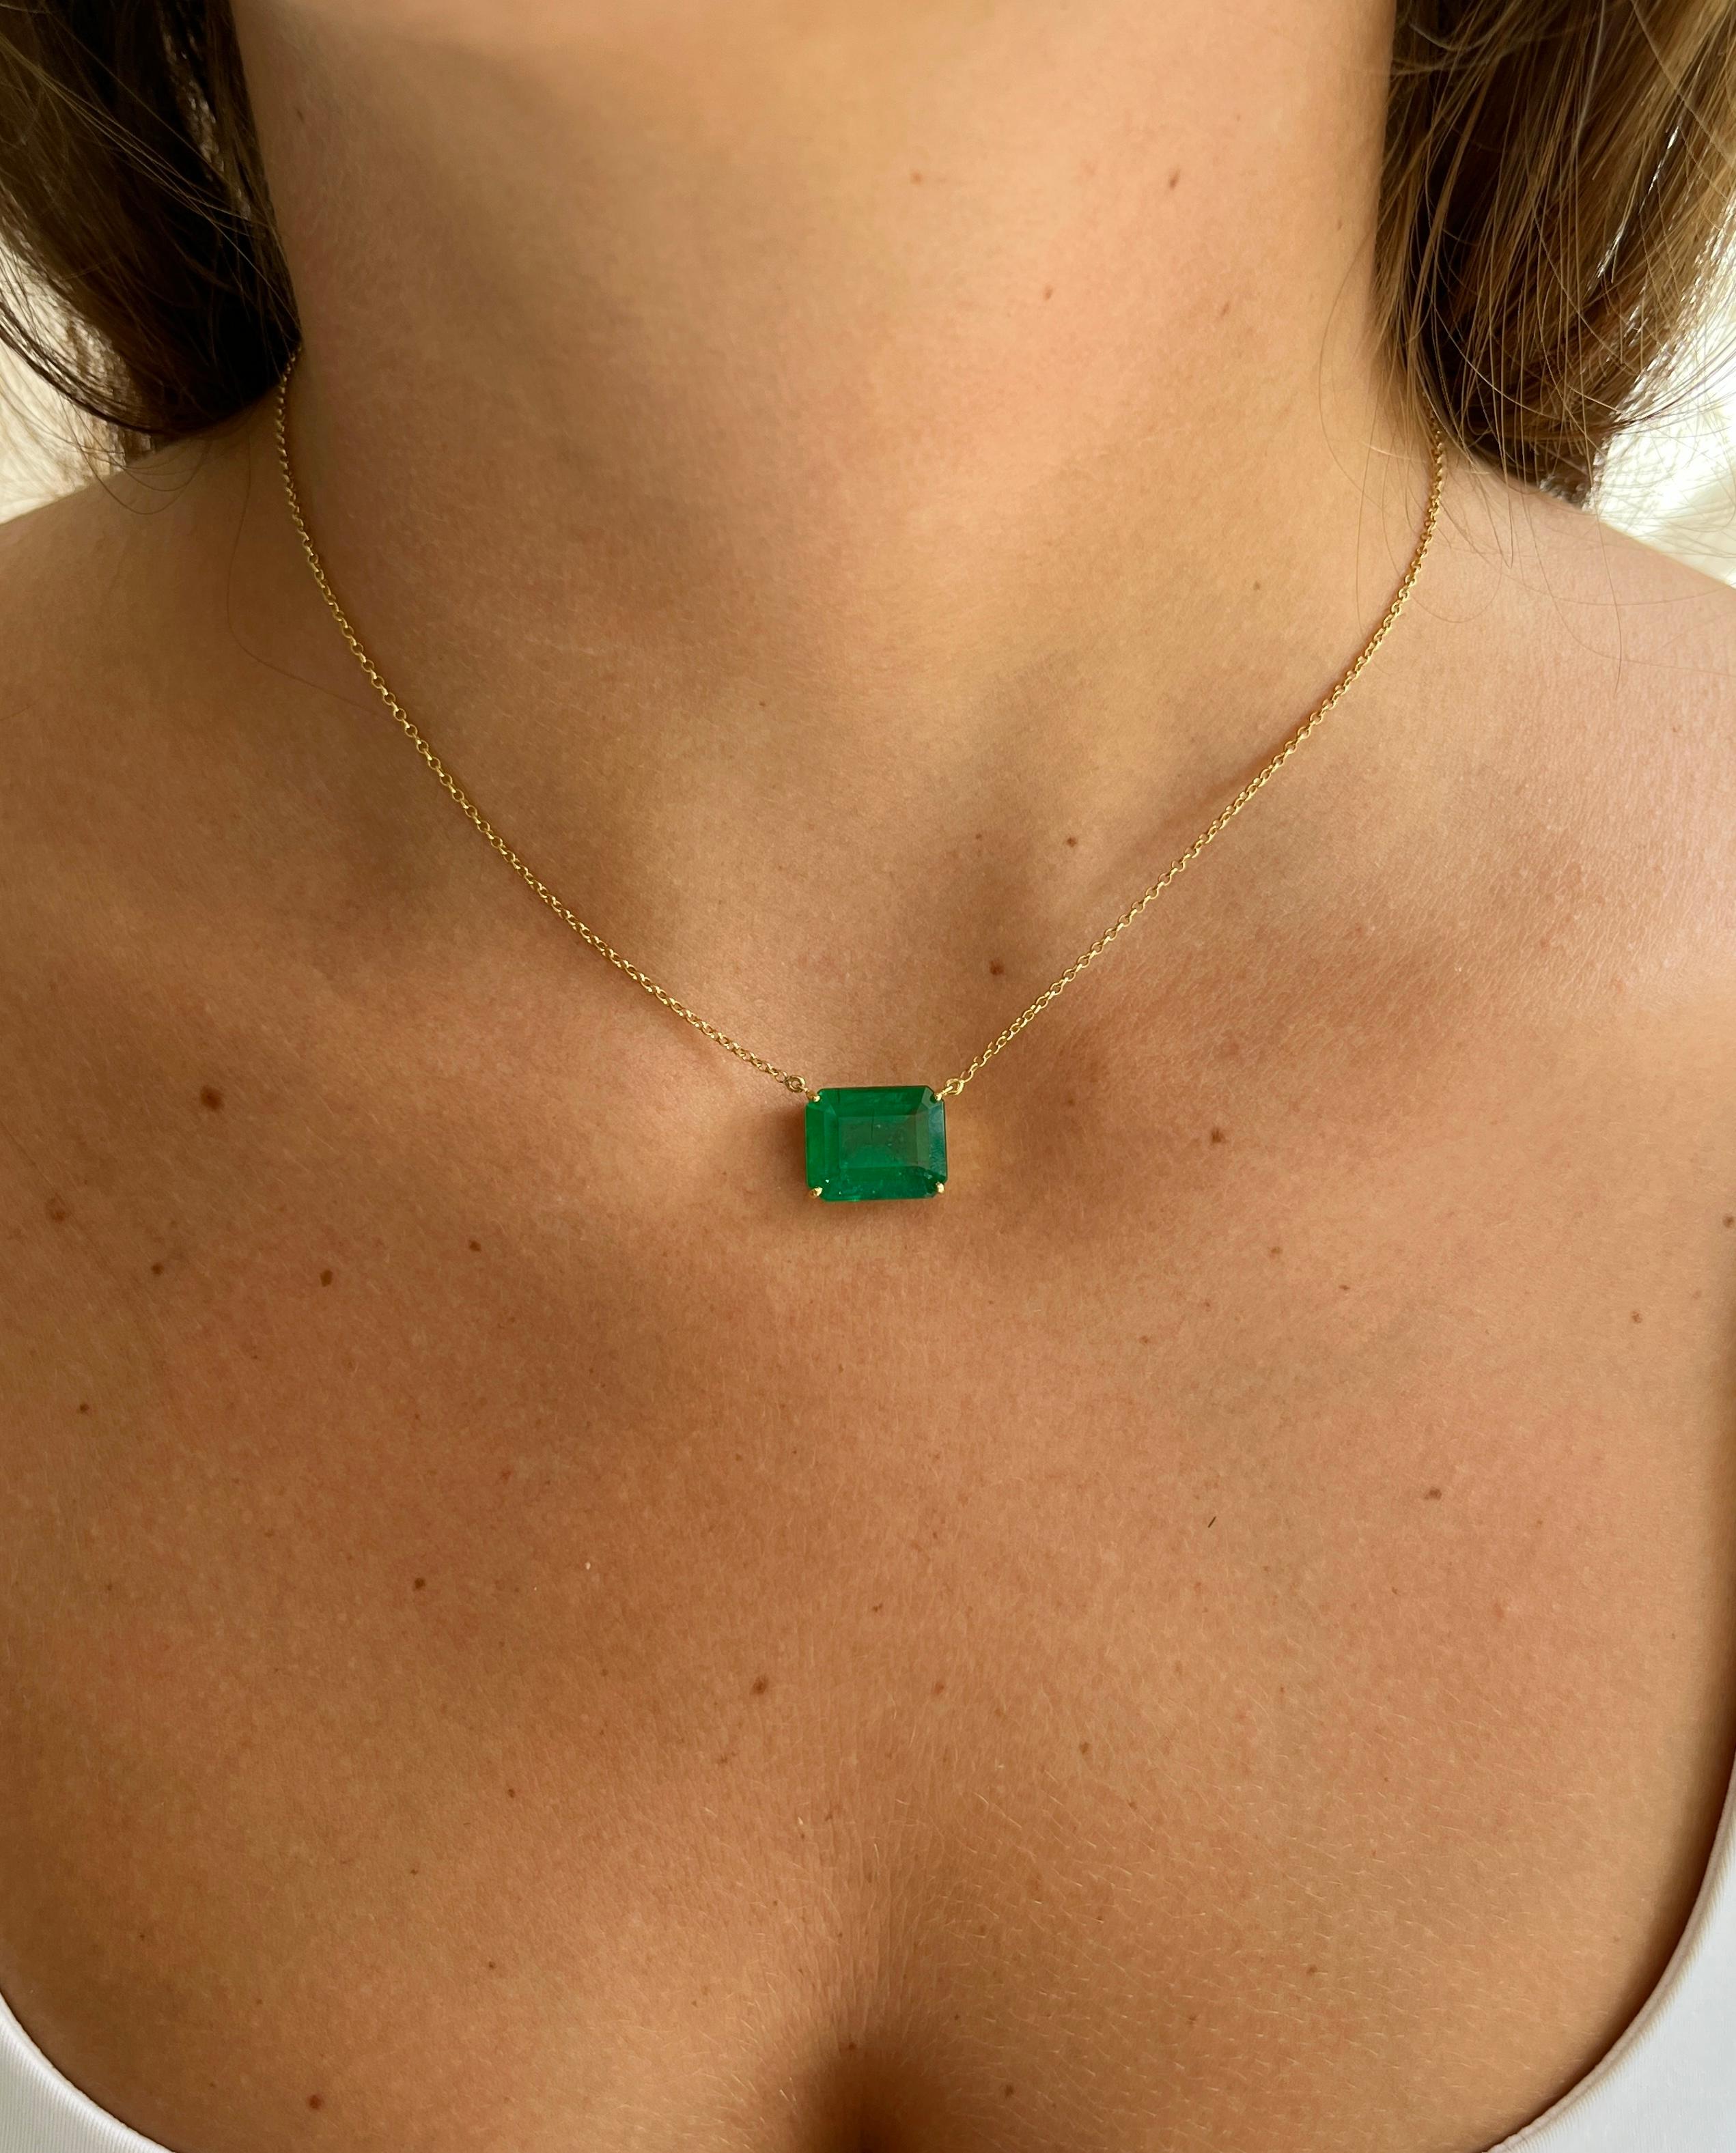 8.67 Carat Vivid Green Colombian Emerald Solitaire Pendant Necklace in 18K Gold For Sale 3